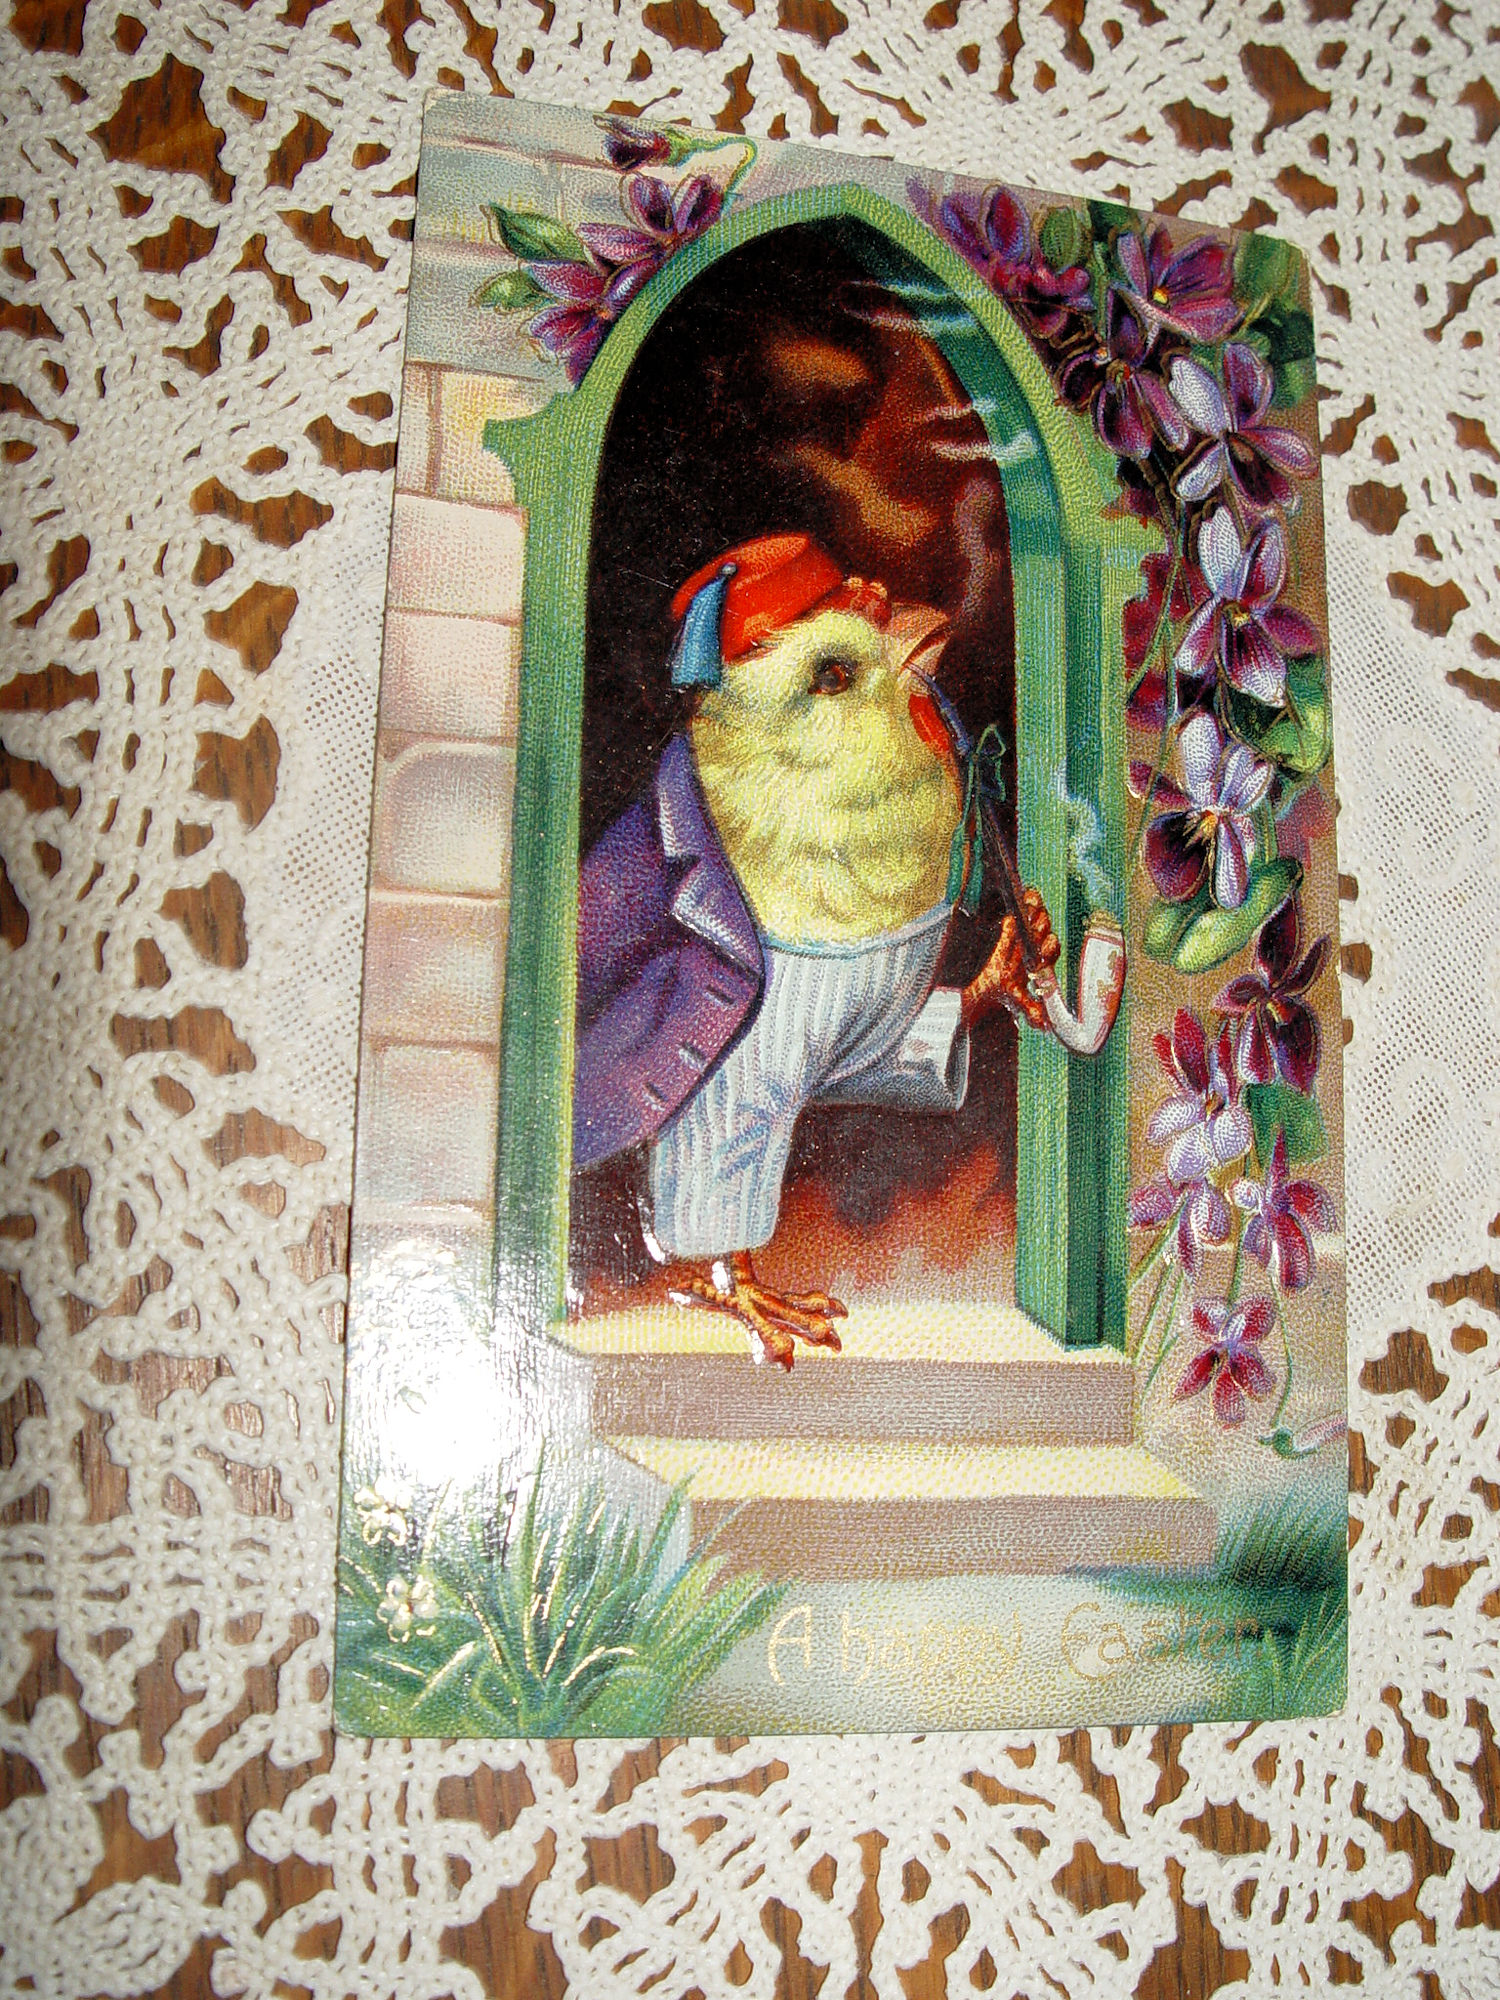 1910 Happy
                                                Easter Postcard -
                                                Anthropomorphic Dressed
                                                Chick, Smoking Pipe, Fez
                                                Hat